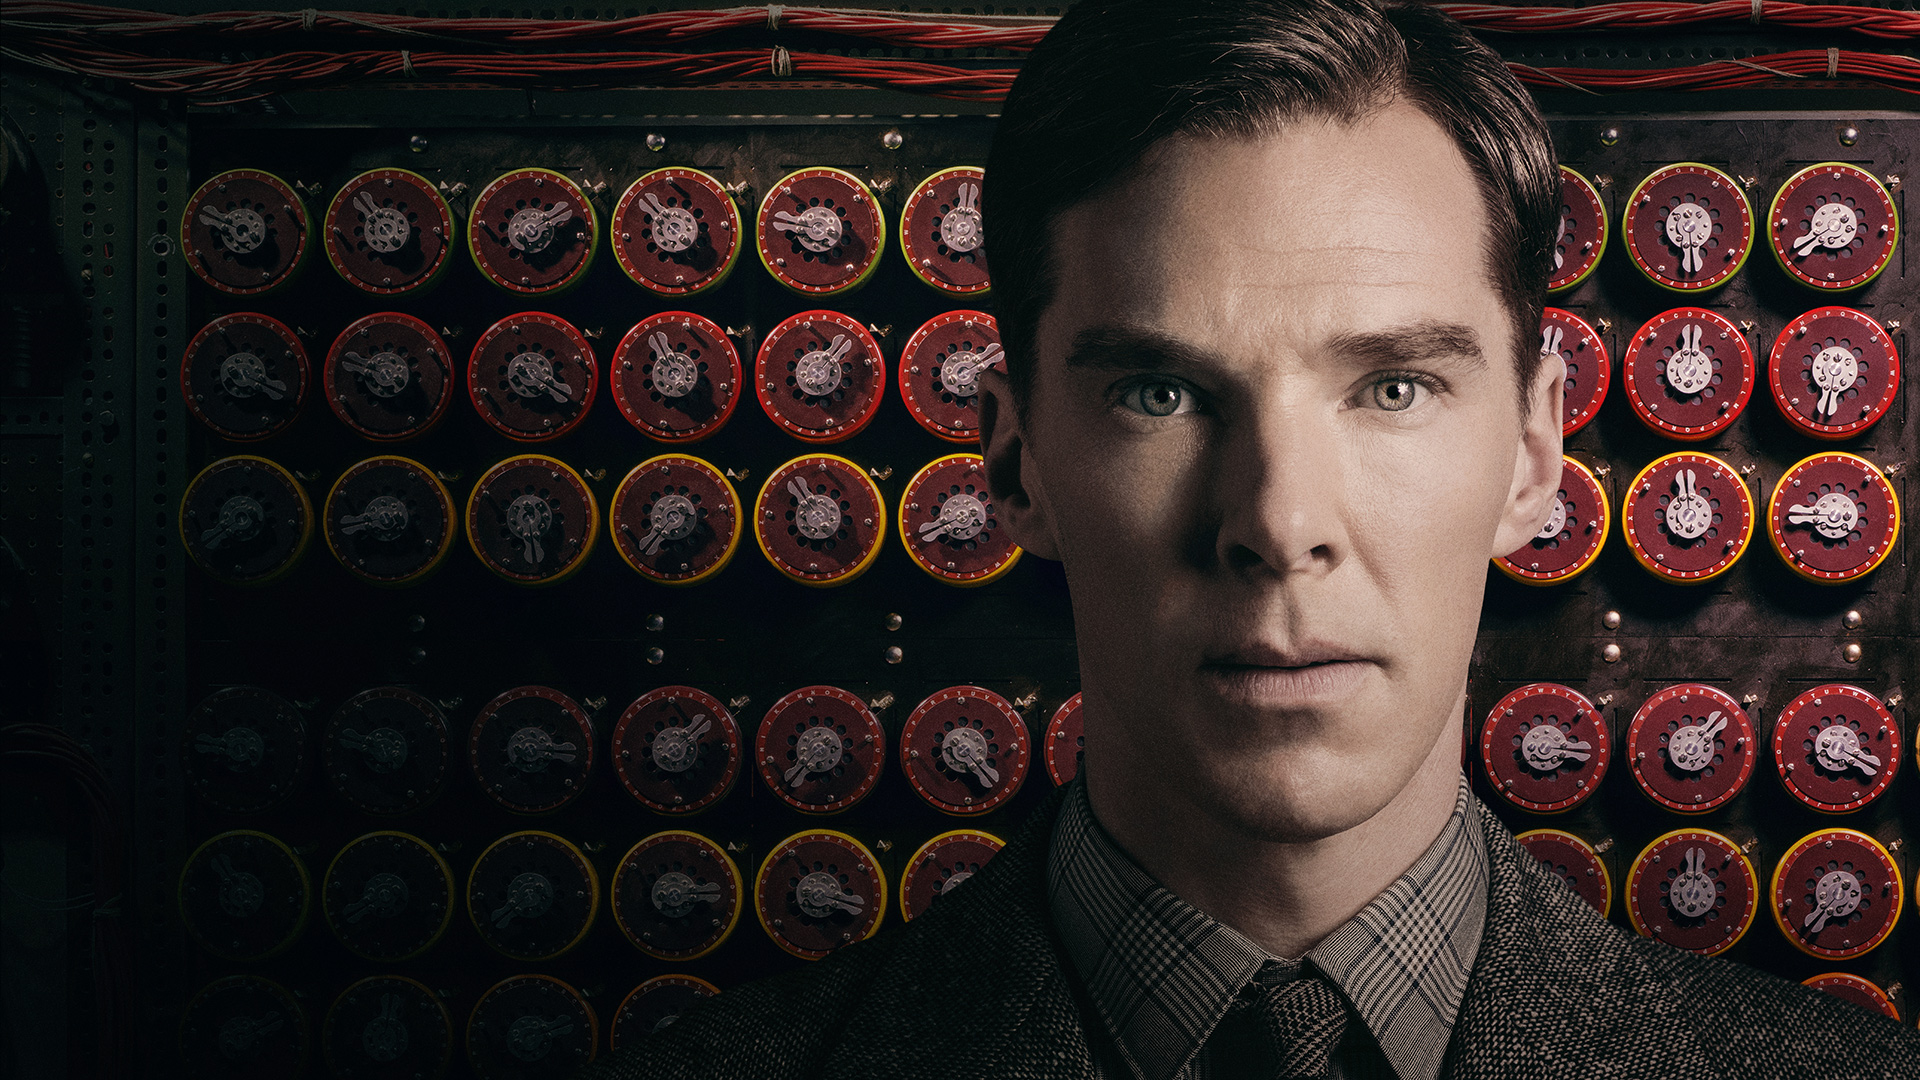 The Imitation Game Wallpapers